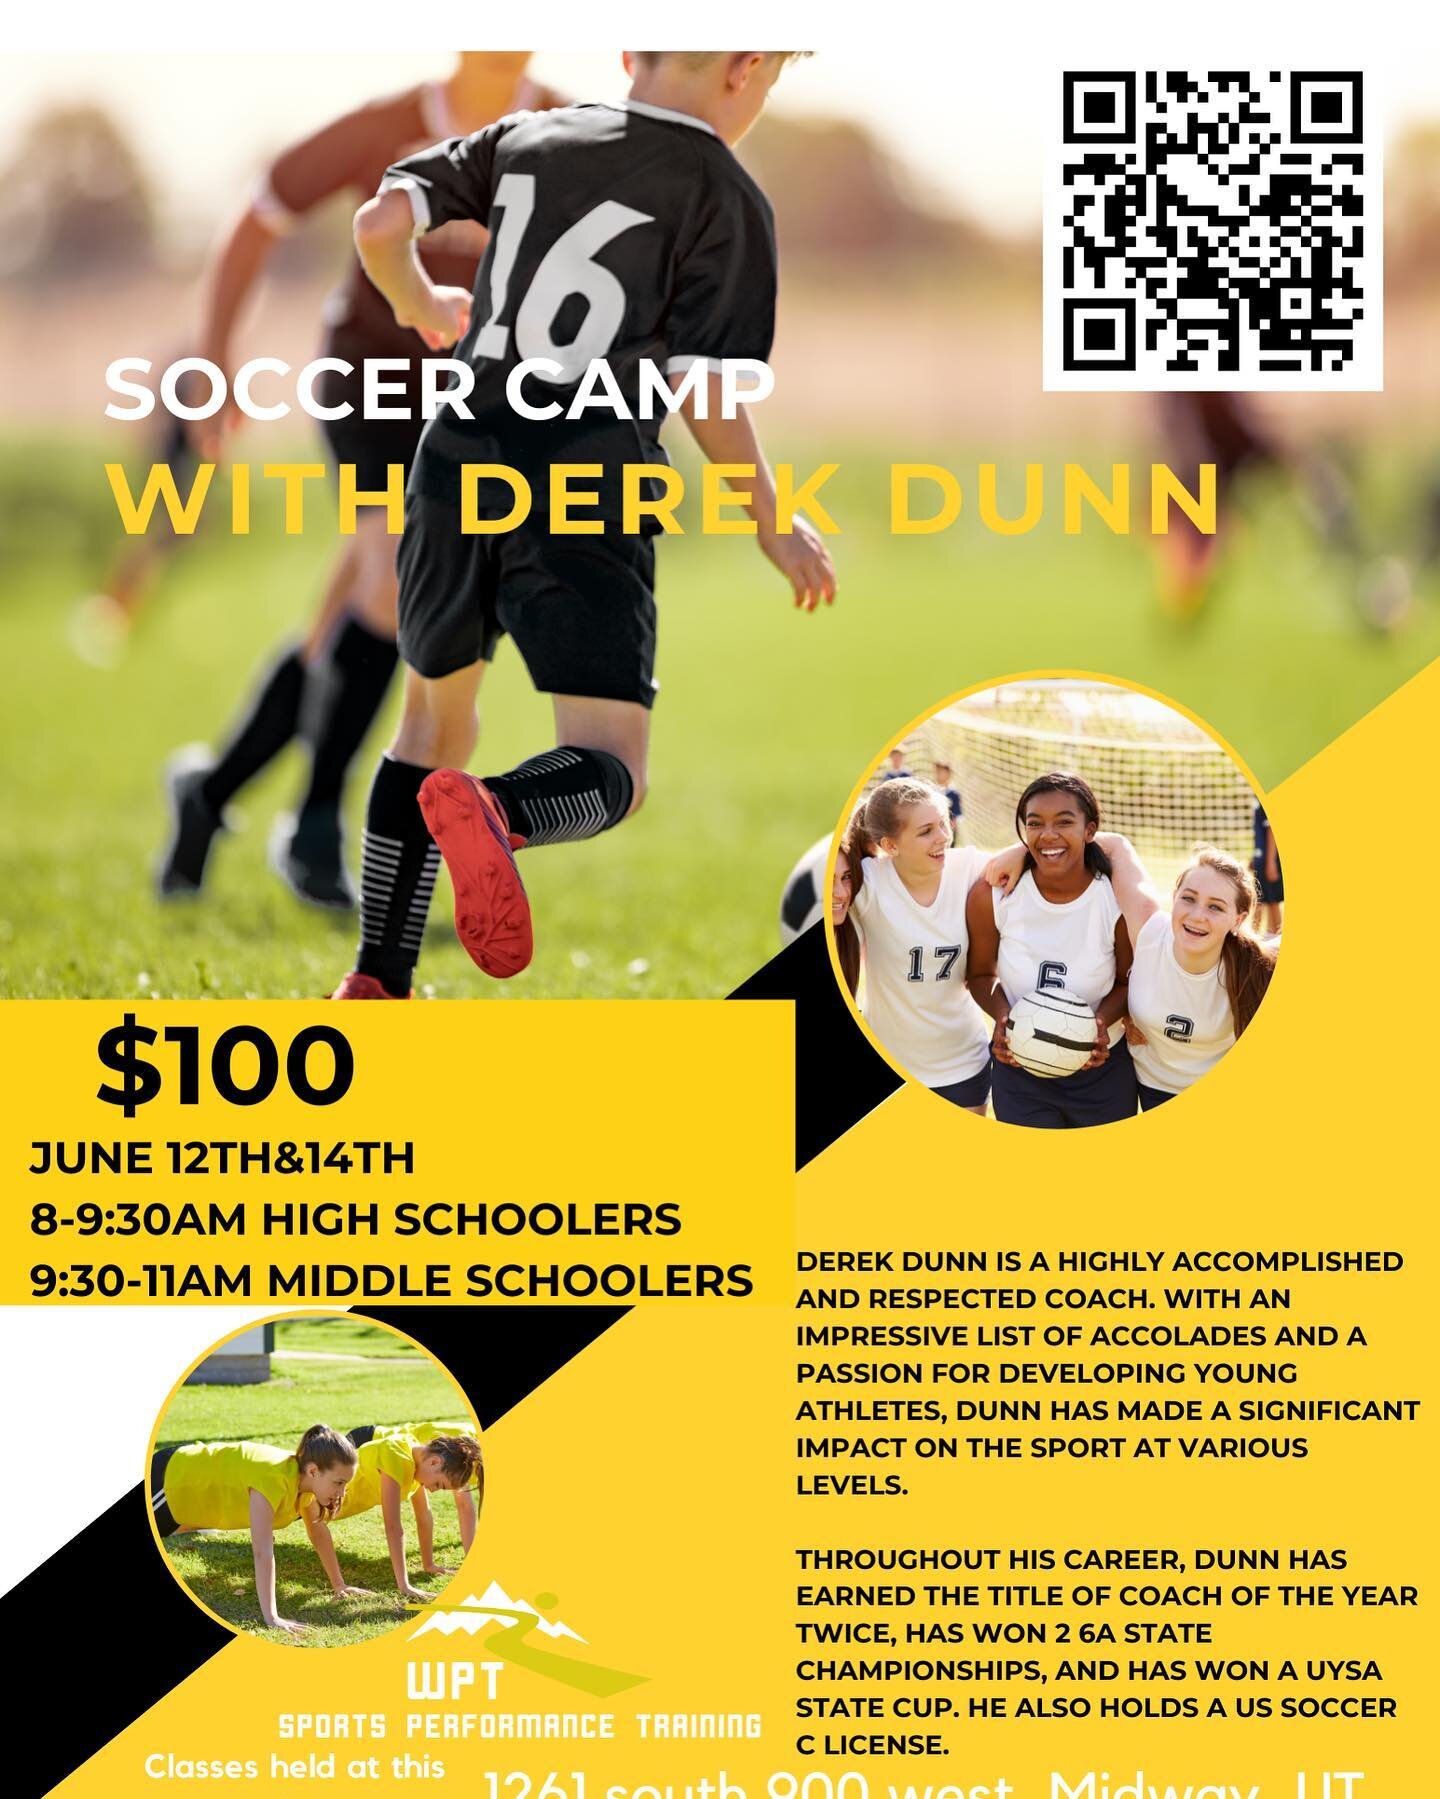 Soccer camp in June! Up for registration for boys and girls middle school to high school age. You&rsquo;re athlete will be doing speed/agility training as well as soccer training with the incredible coach, Derek Dunn.